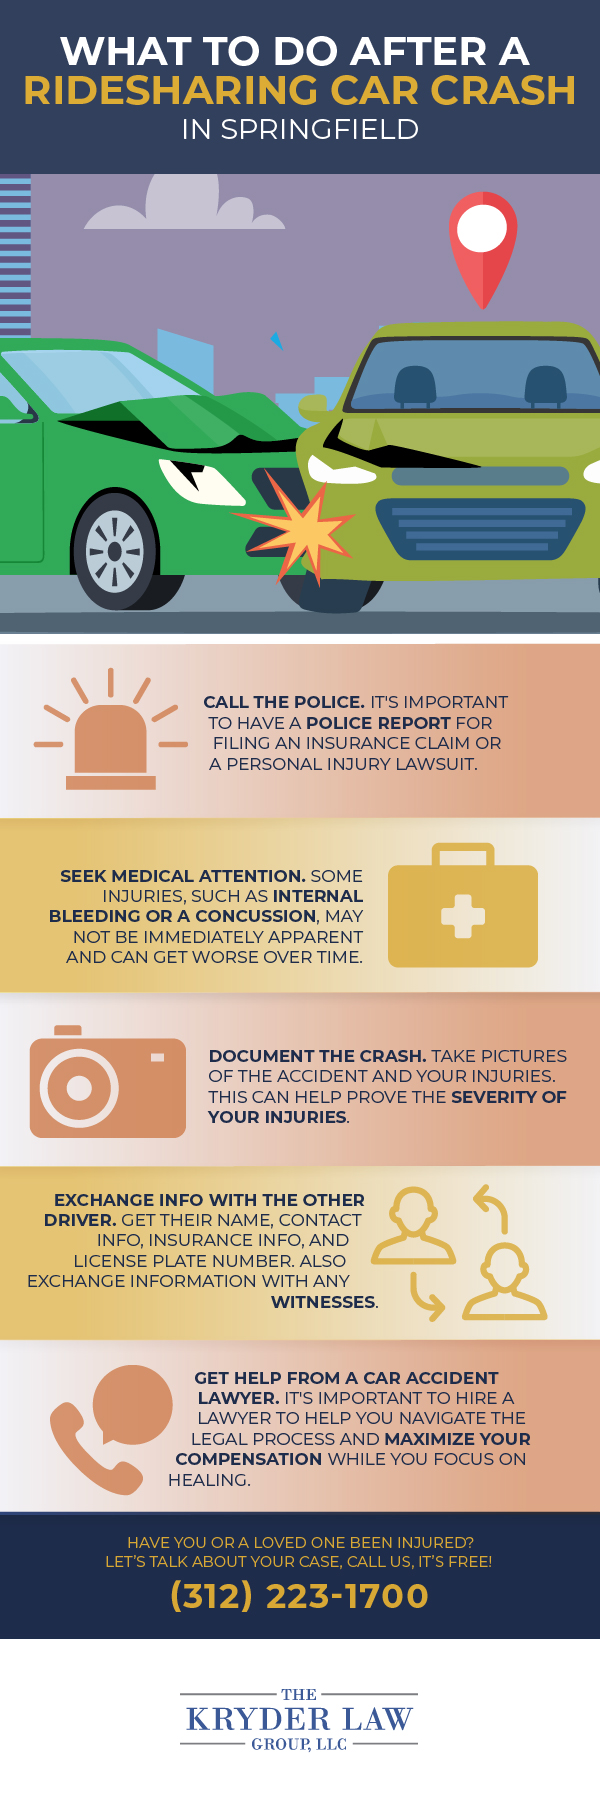 What to Do After a Ridesharing Car Crash in Springfield Infographic